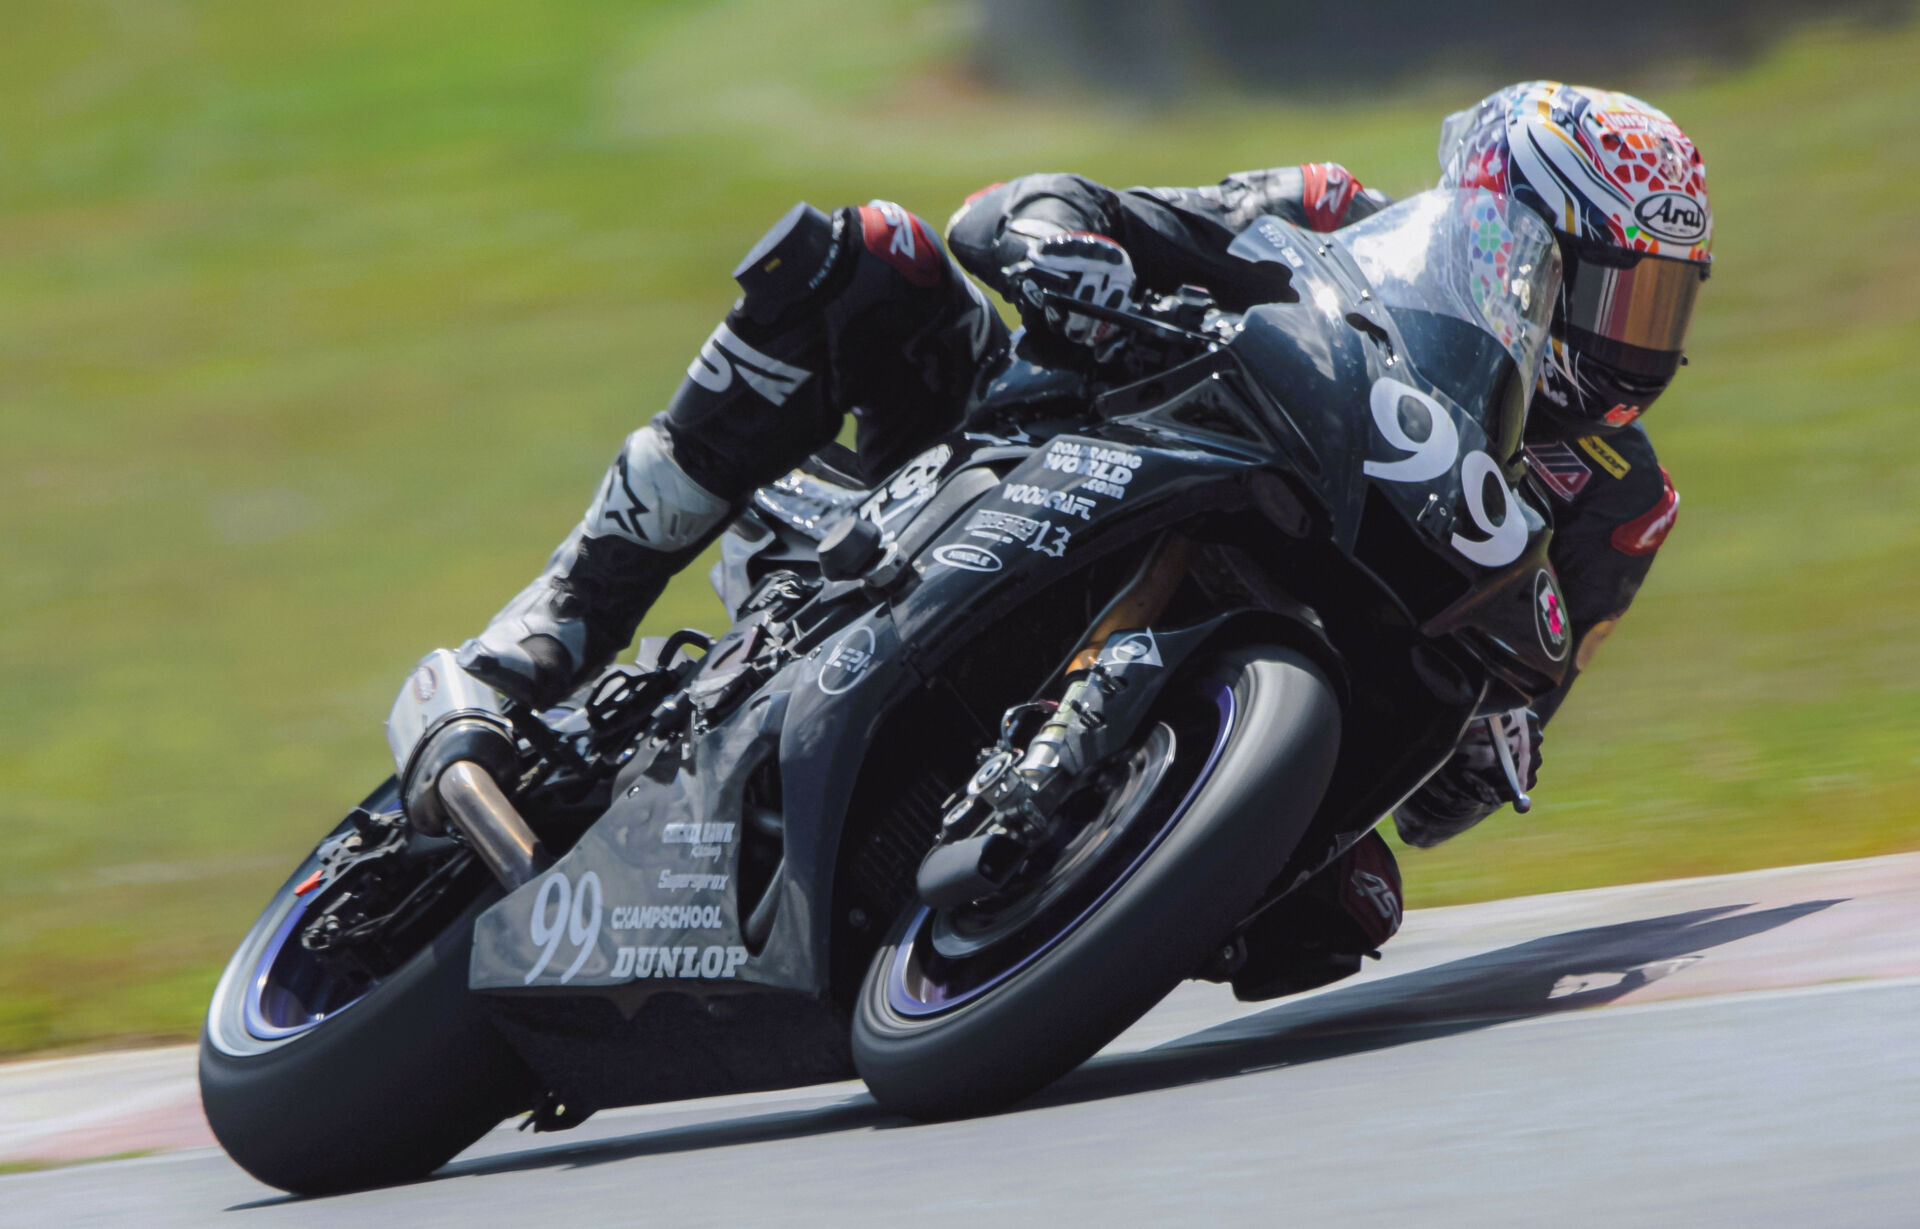 Taylor Knapp (99) takes a weekend off from work testing Dunlop motorcycle tires to come to Summit Point to ride a motorcycle equipped with Dunlop tires..but recreationally. Photo by Vae Vang/Noiseless Productions, courtesy Army of Darkness.